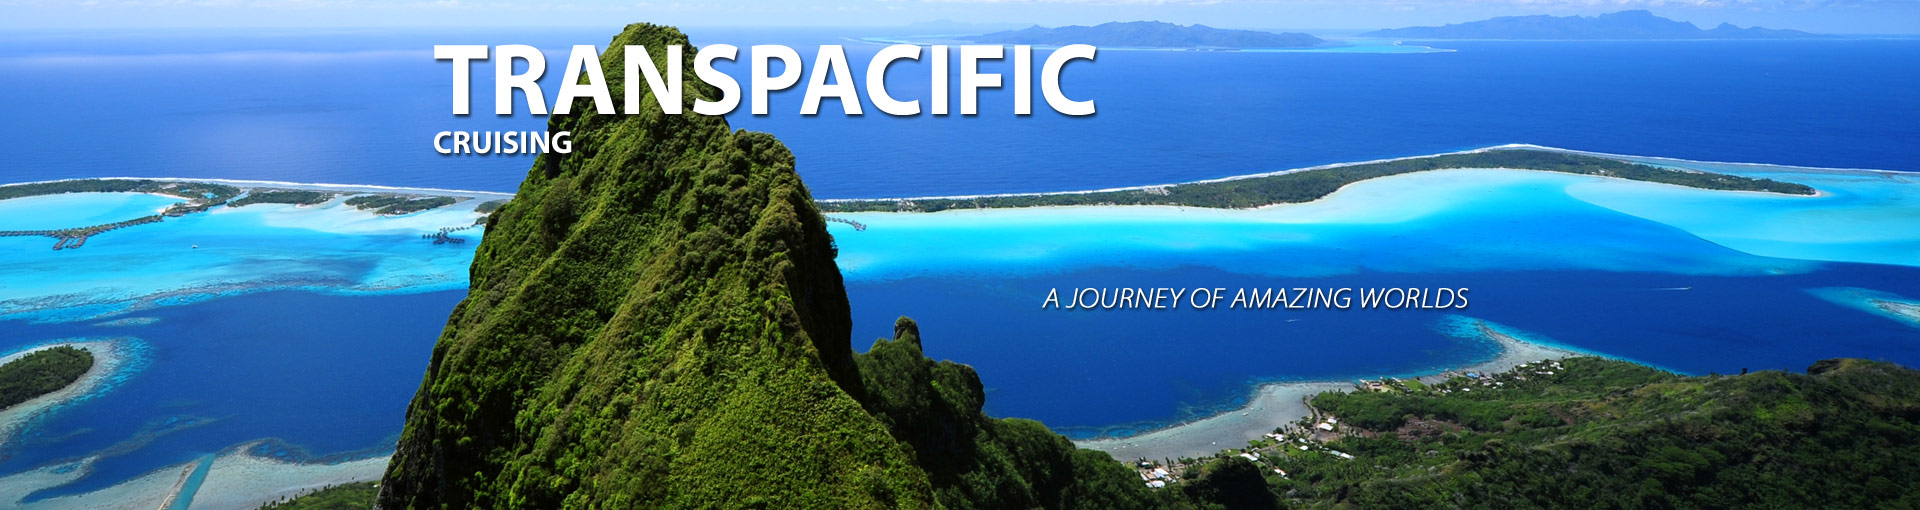 Transpacific Cruises, 2019, 2020 and 2021 Pacific Ocean Cruises The